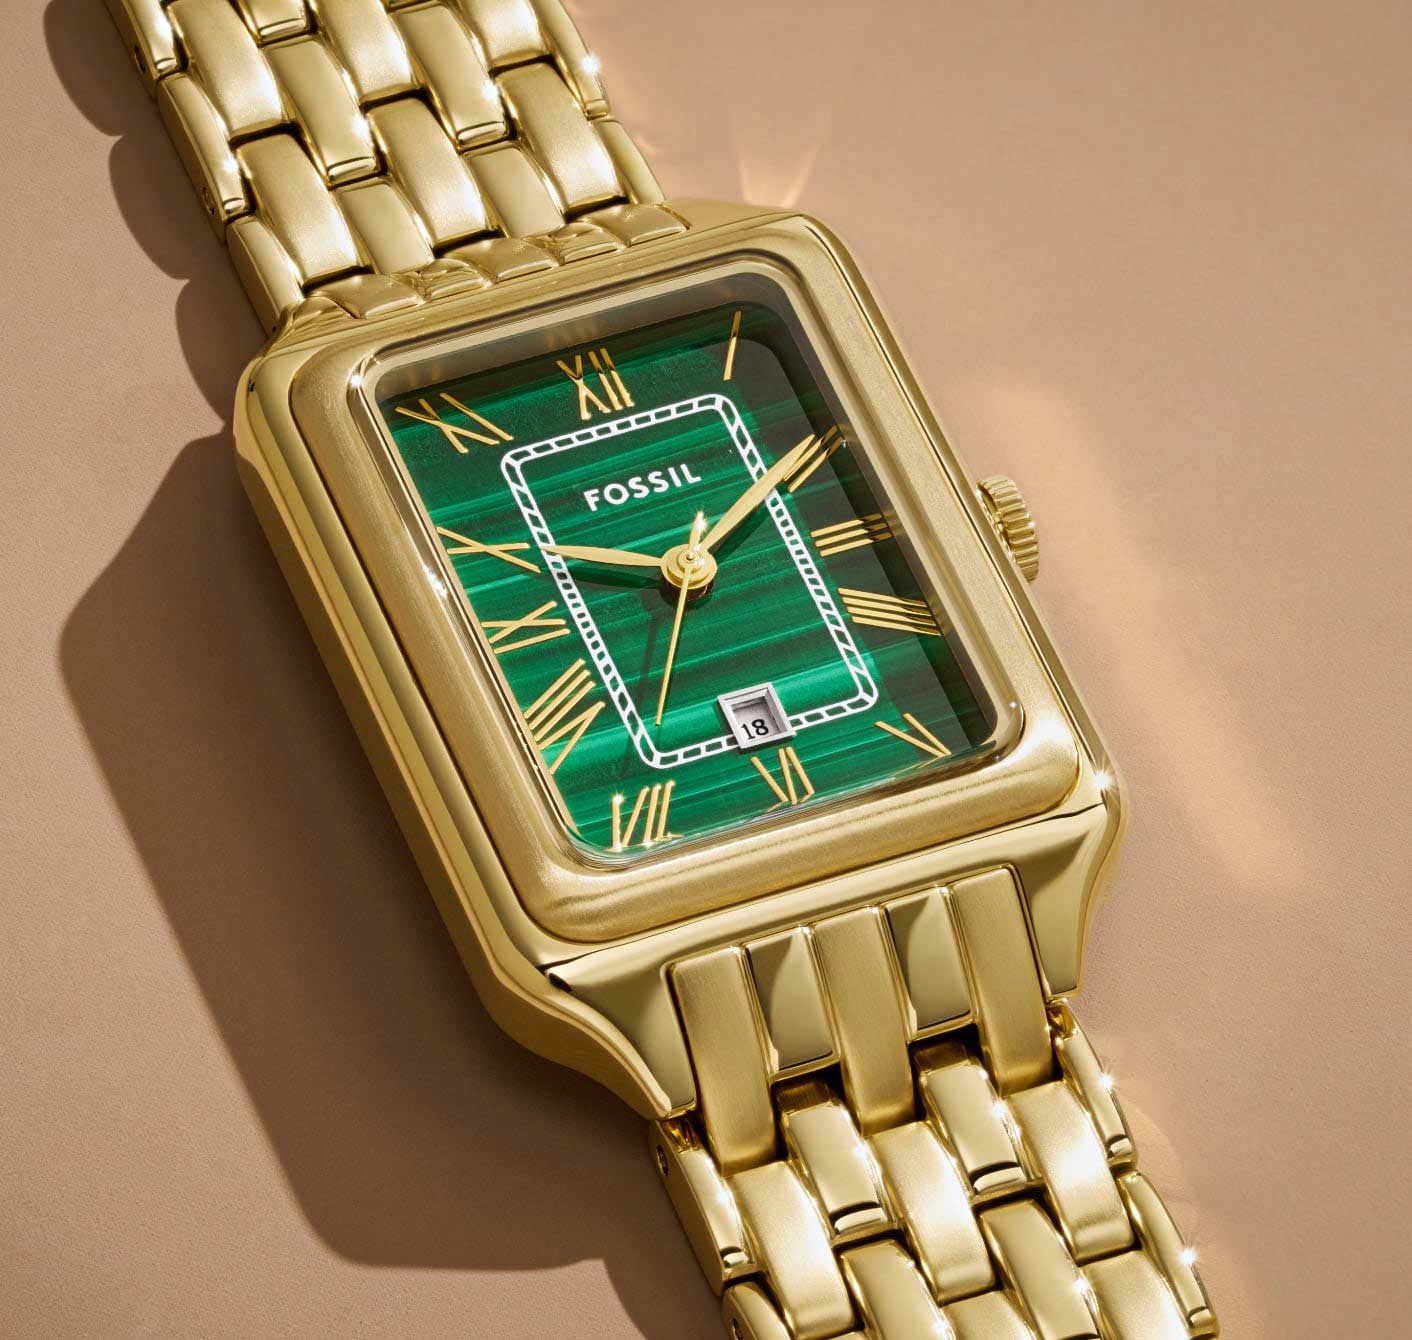 GIF of a woman wearing gold-tone jewellery and a gold-tone Raquel watch with malachite dial; and a close-up of the gold-tone Raquel watch with malachite dial.